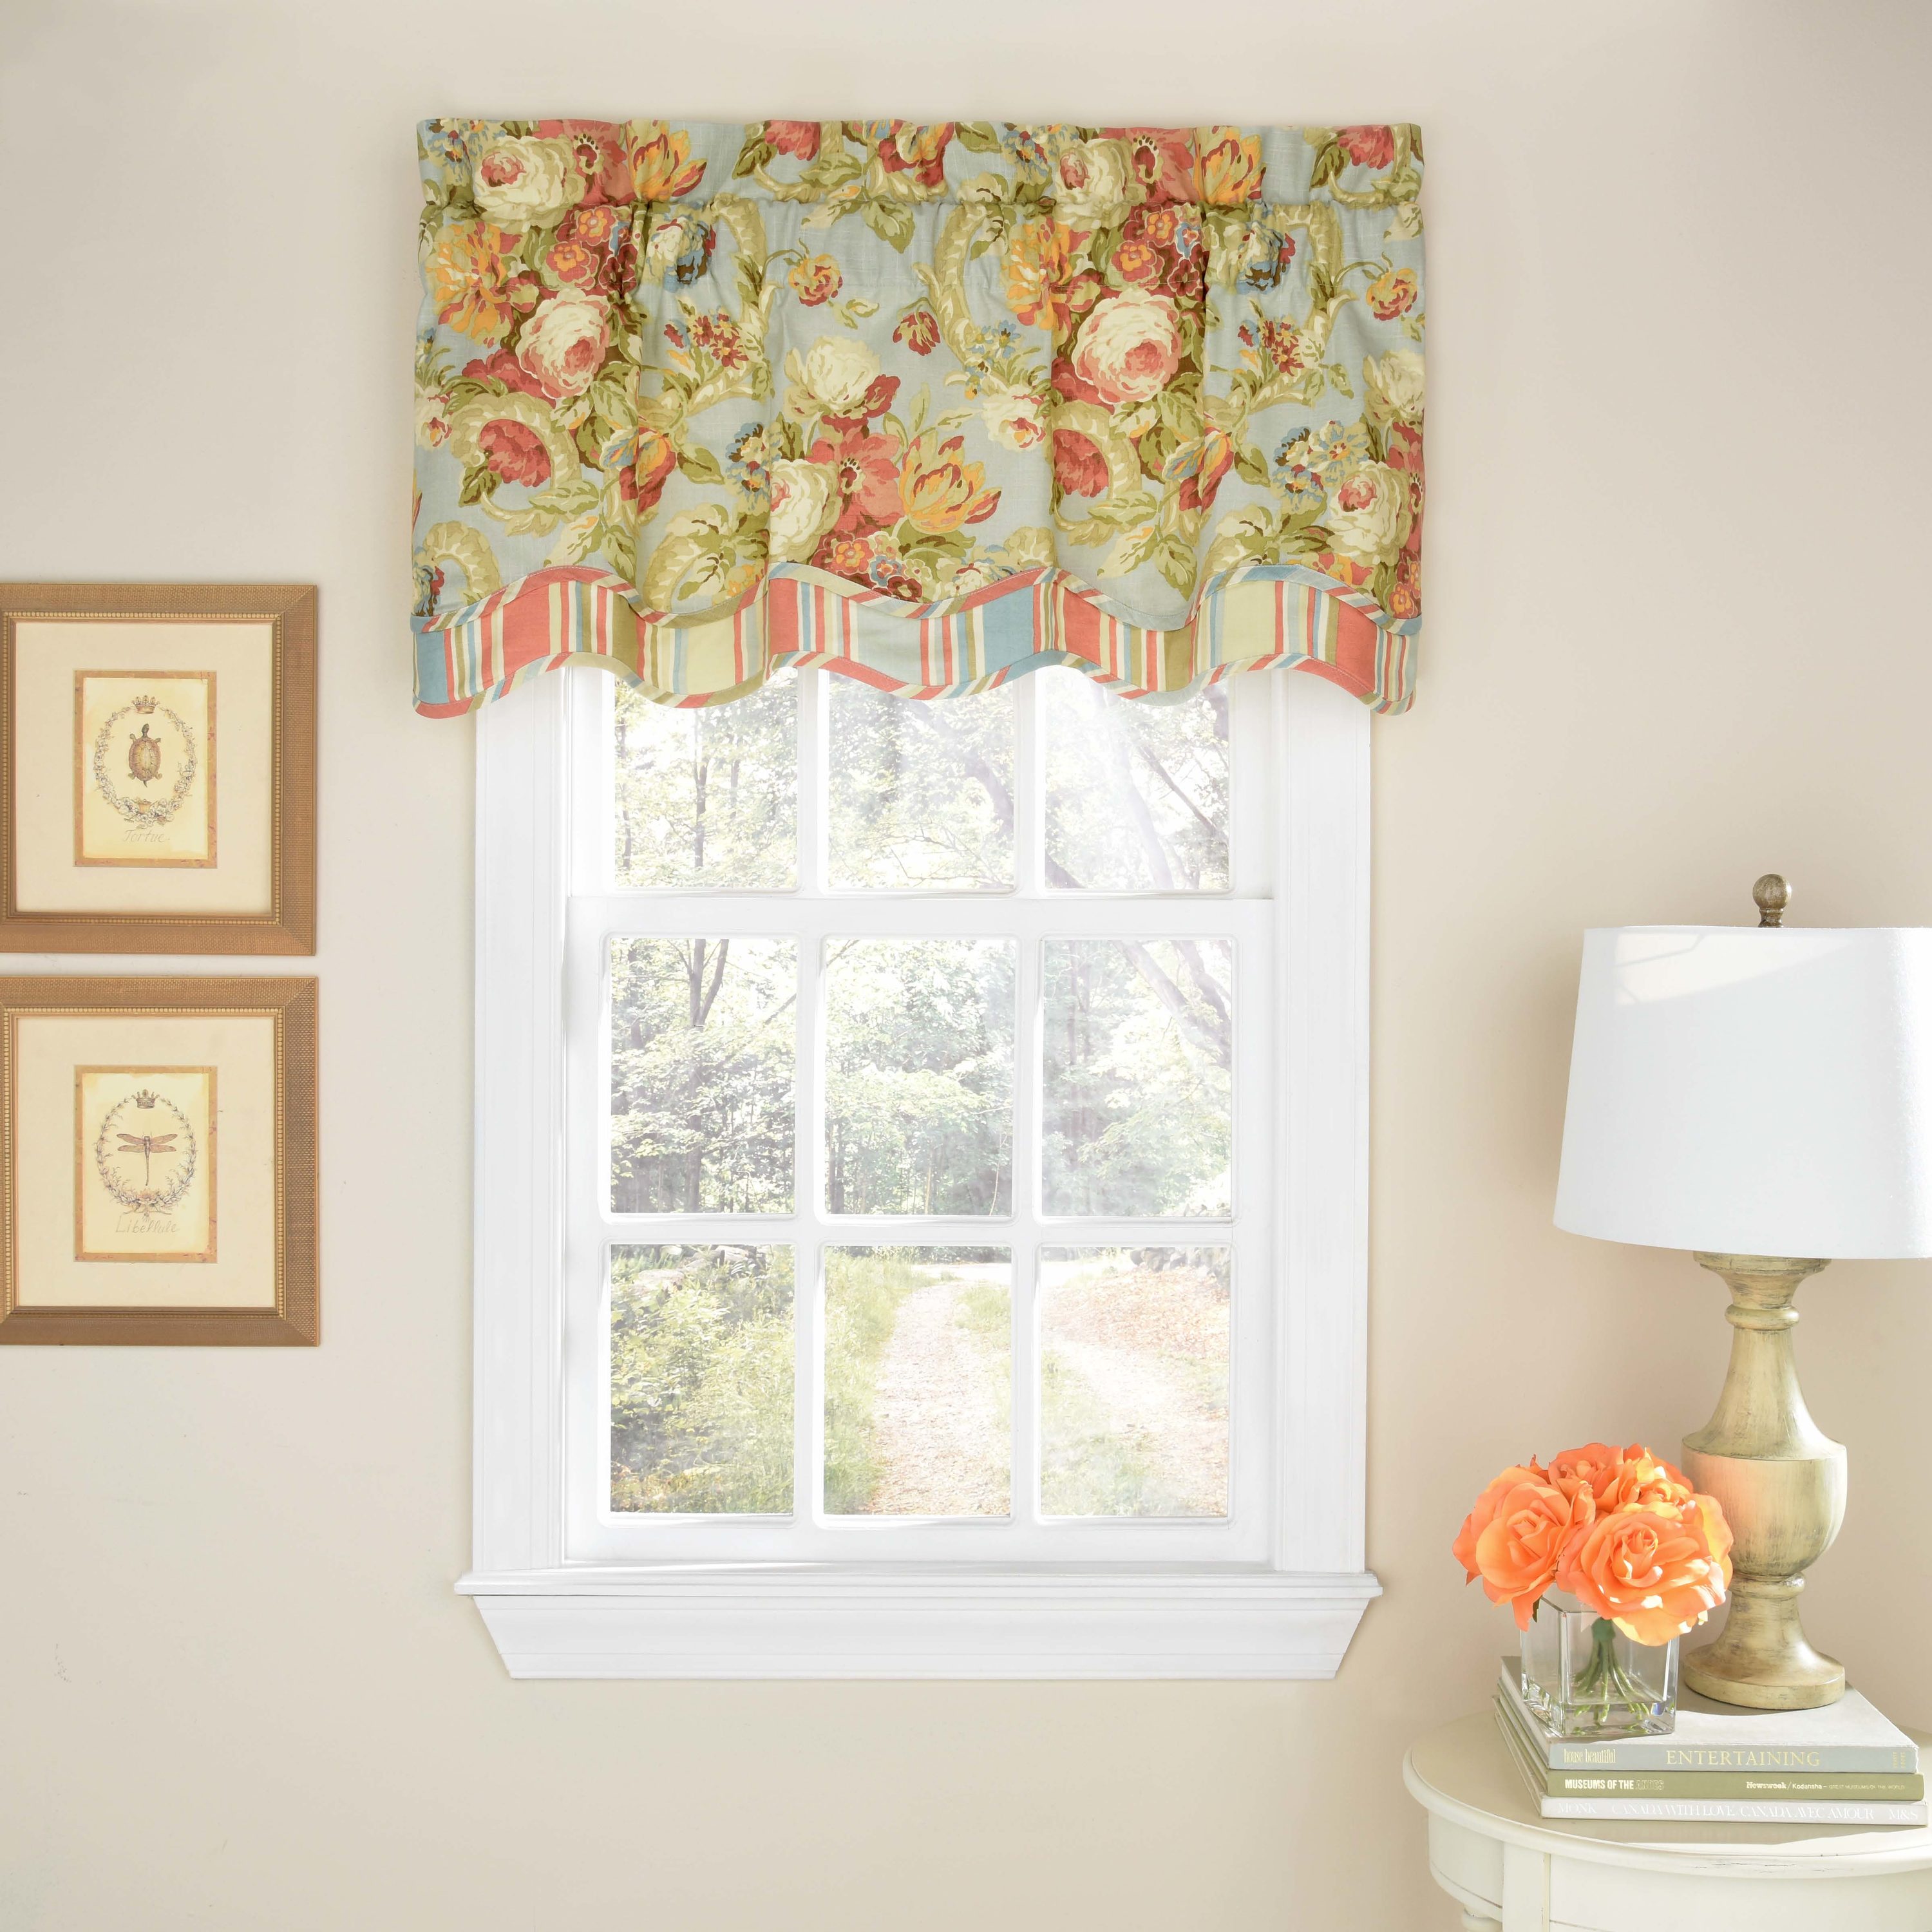 Waverly Spring Bling 18-in Vapor Cotton Rod Valances department at in Valance Pocket the